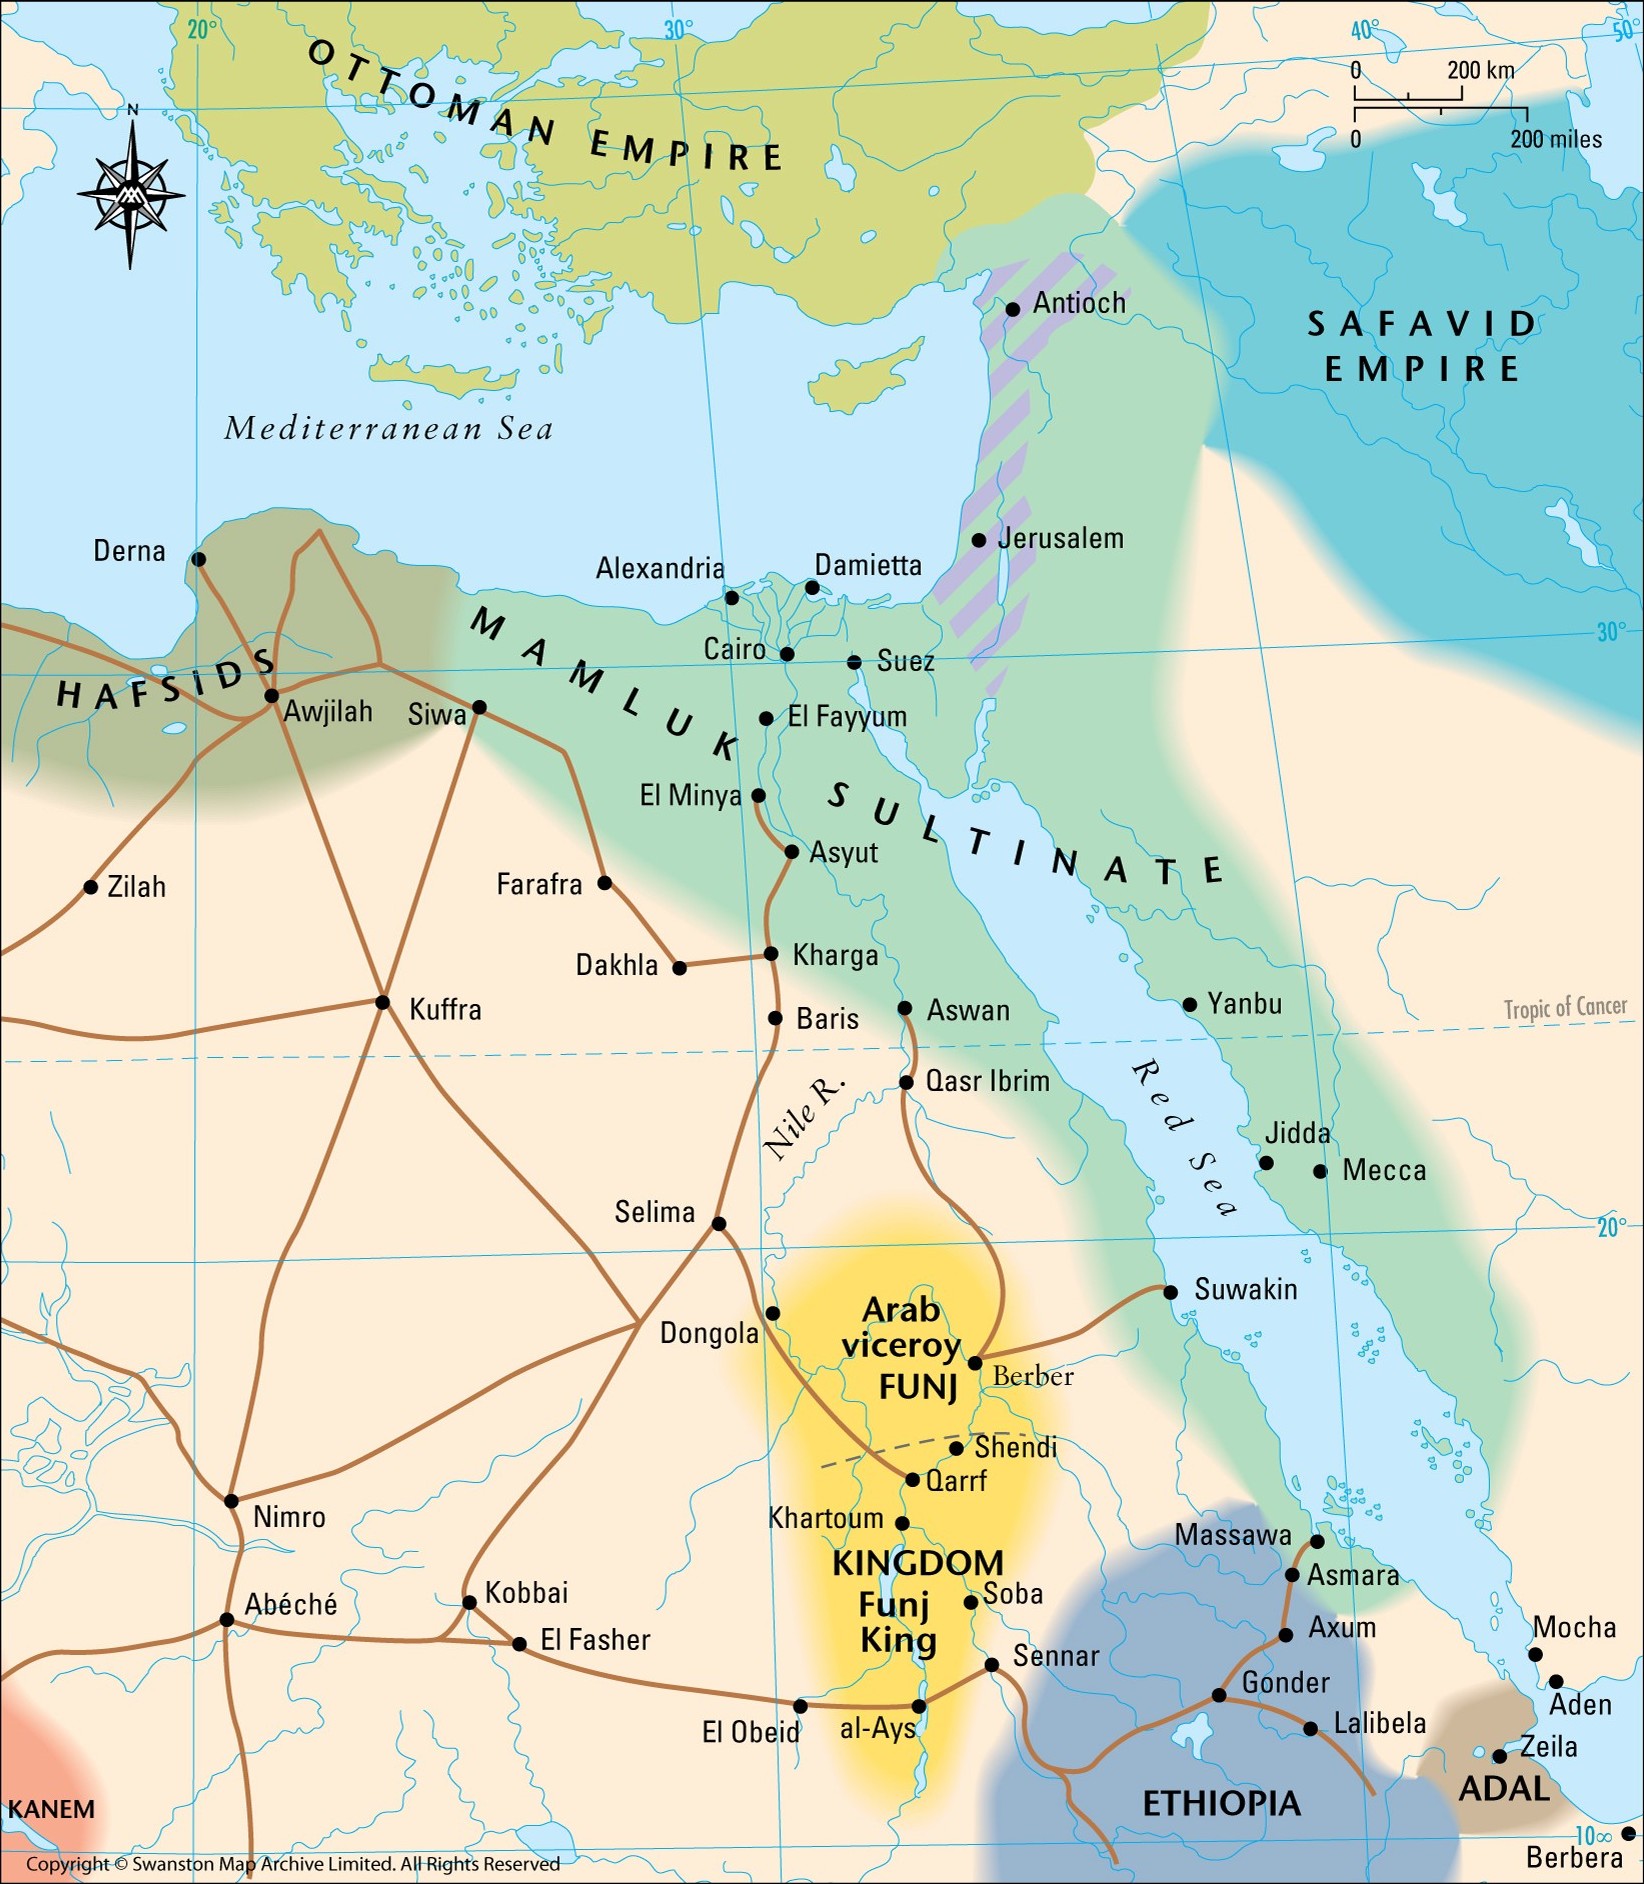 Middle East in the Start of 16th Century